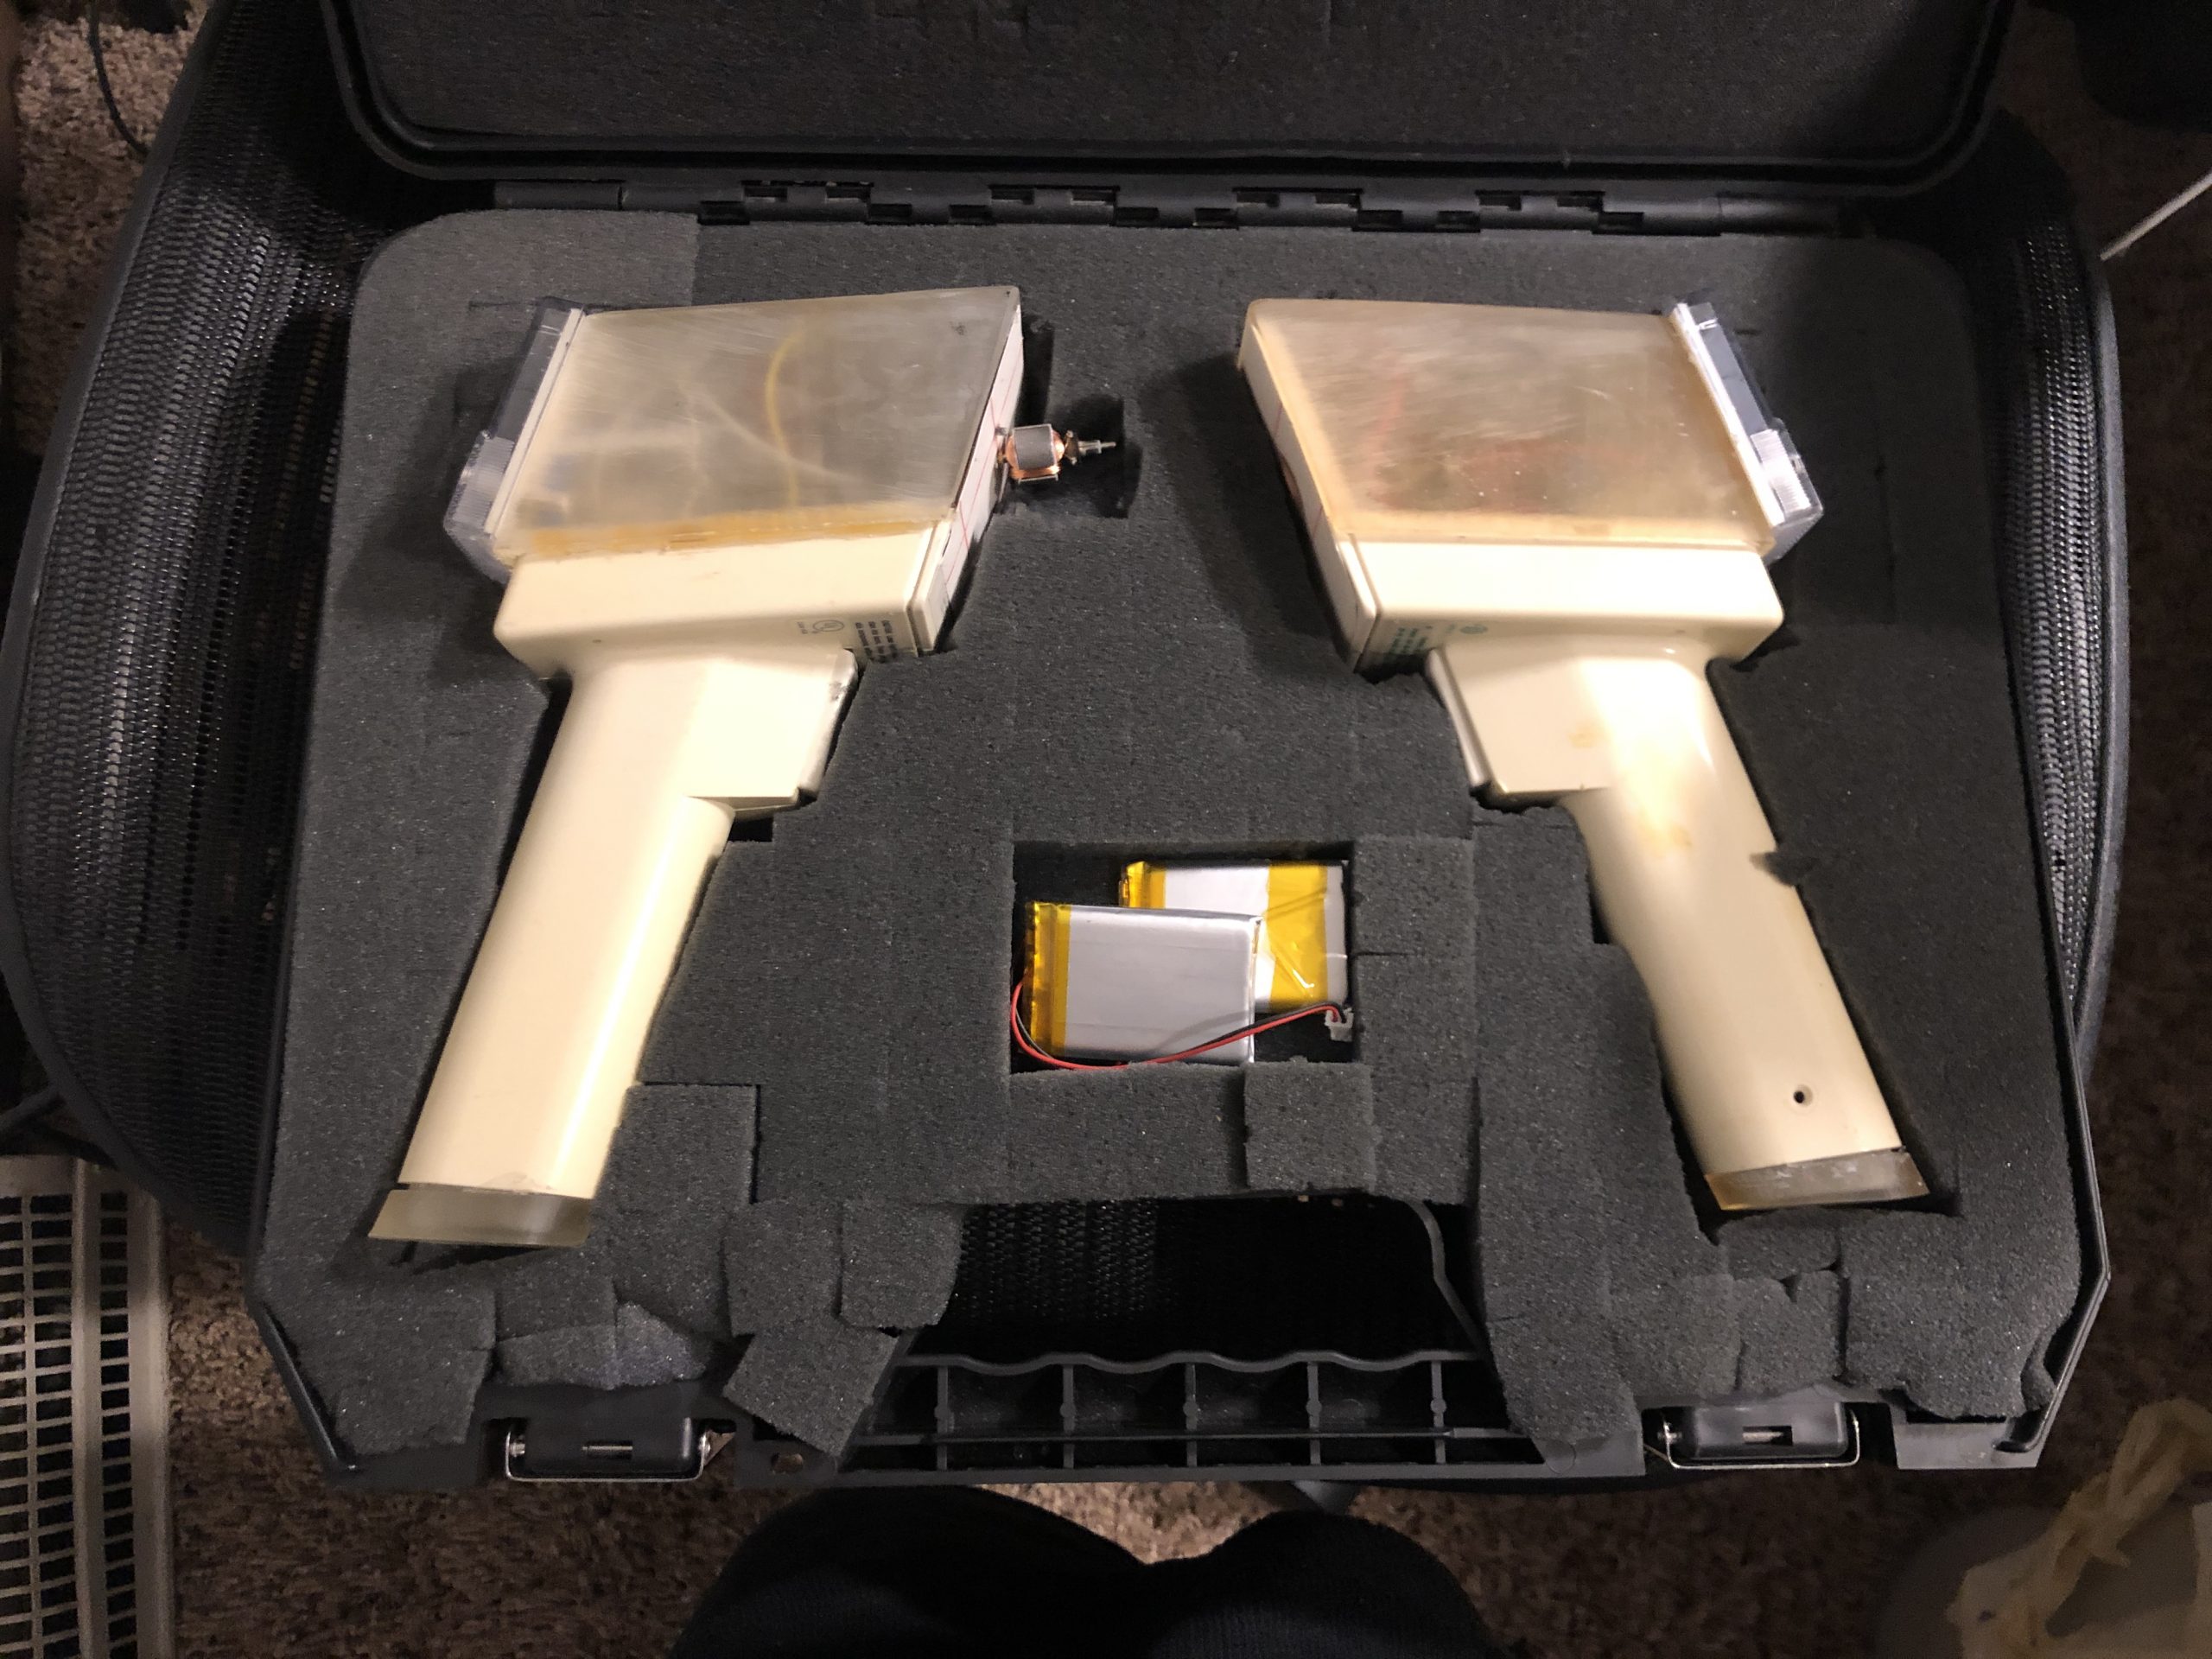 The two prototype Meiger counters in their carrying case, with the batteries removed and stored in a separate compartmenta